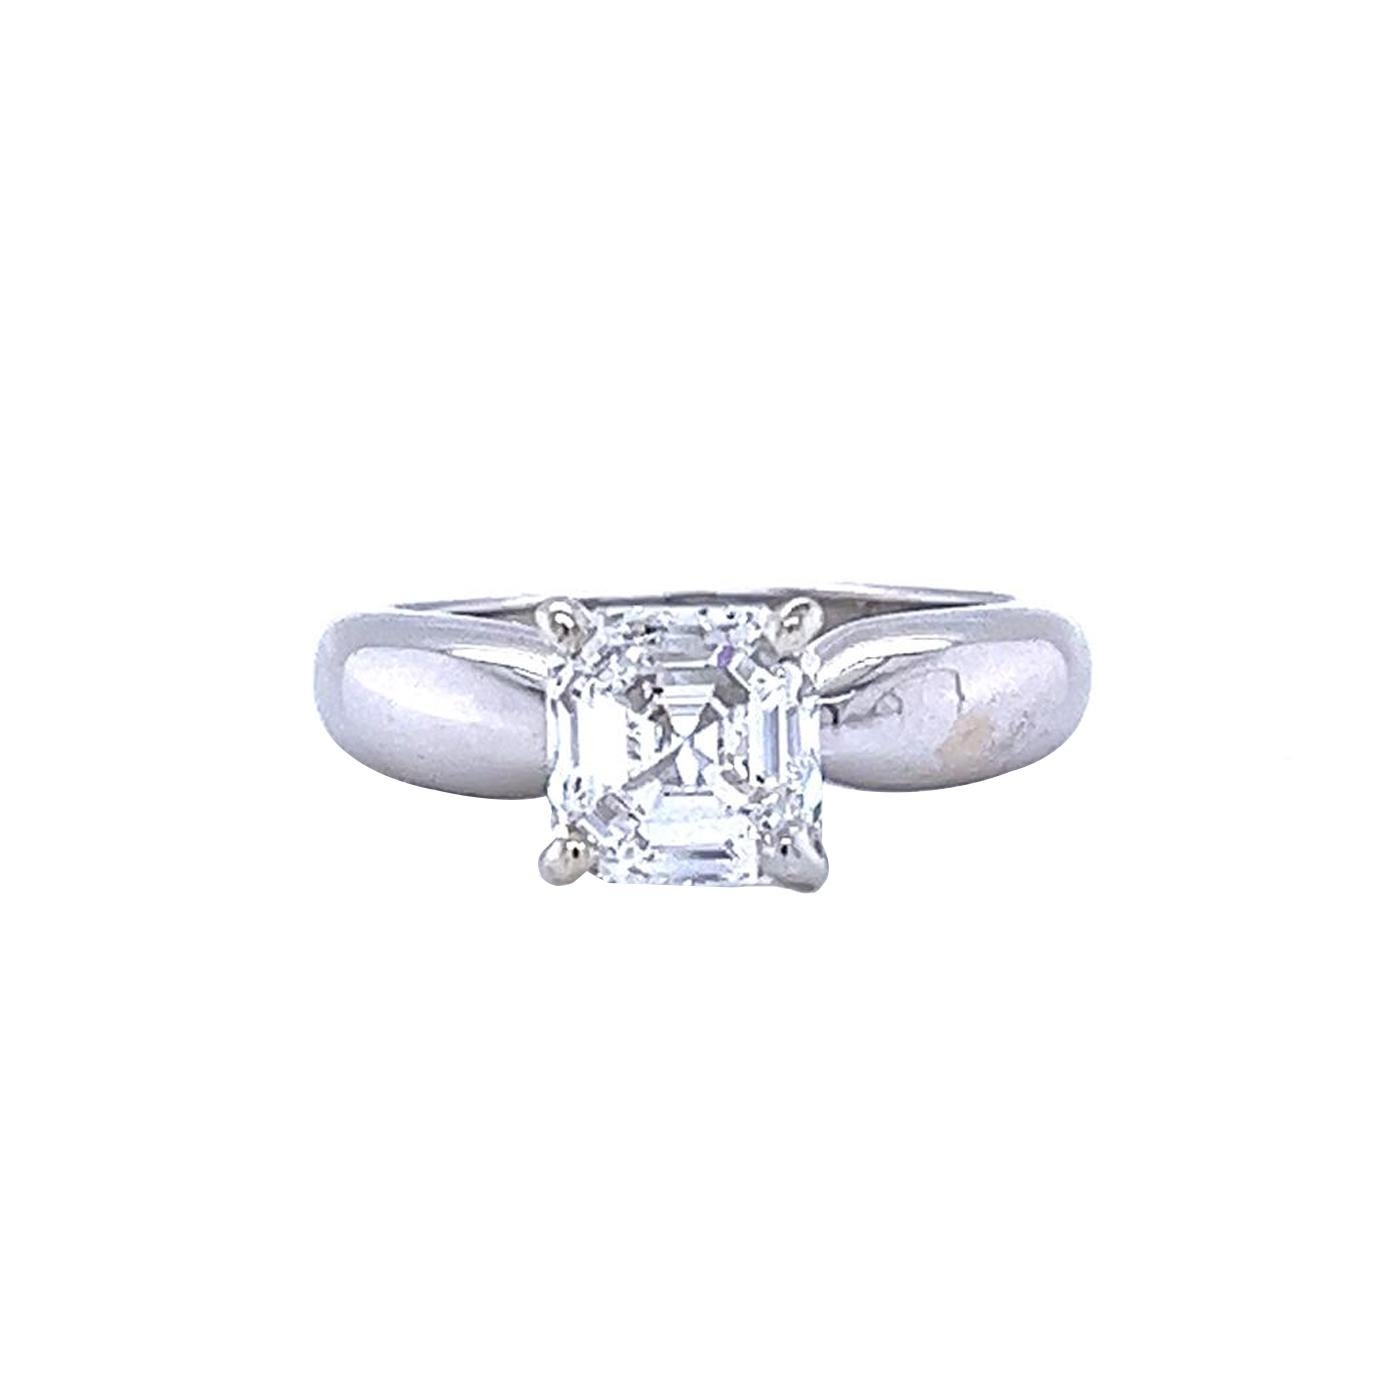 Beautiful Exceptional GIA-Certified diamond Bridal ring. The ring is made in 18 Karat White Gold, GIA Graded with Excellent polish and Excellent Symmetry and includes a 2.01-carat Flawless Asher Cut Eye clean Diamond of E color and VS1 clarity.